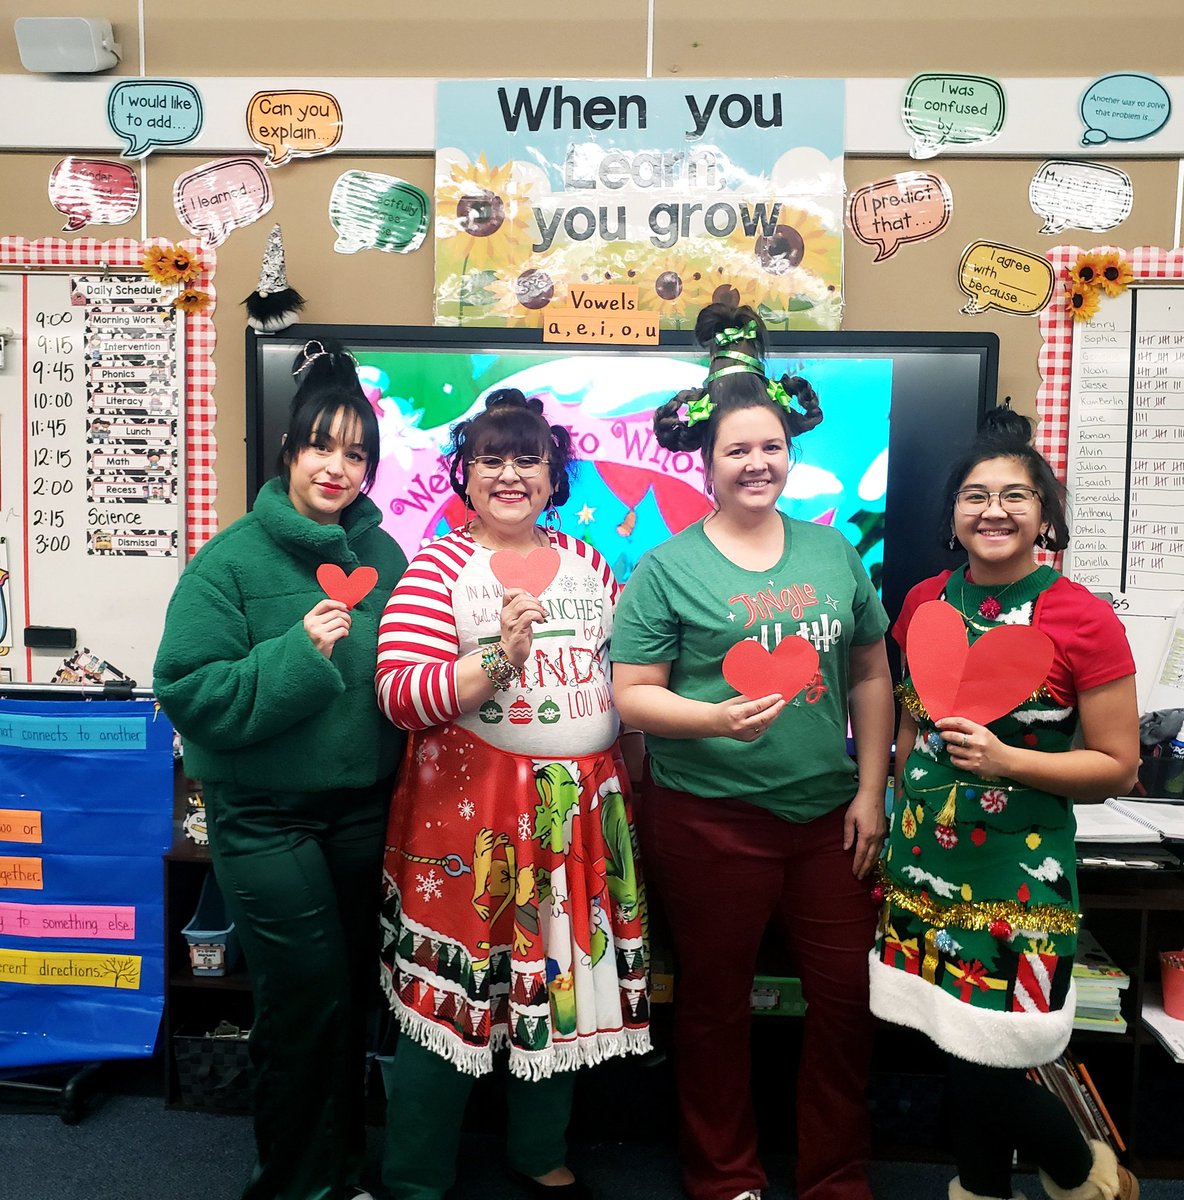 @maxwellbulldogs ...and our hearts grew 4 sizes that day. #WCSDProud #alwaysafunlearningday #holidayfun #grinchmas